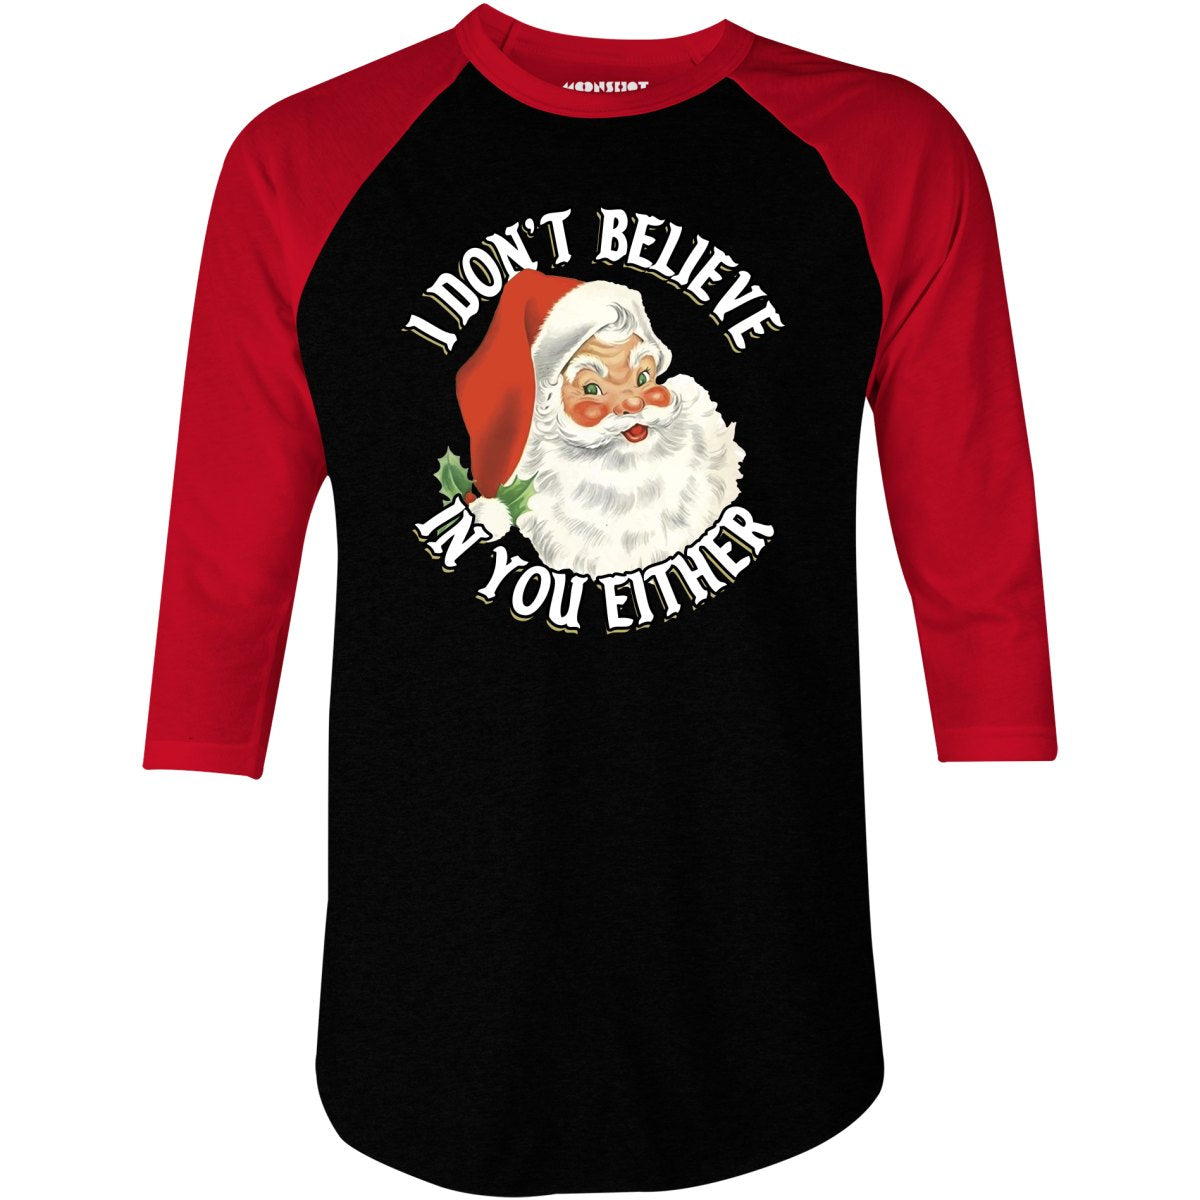 I Don't Believe in You Either - 3/4 Sleeve Raglan T-Shirt